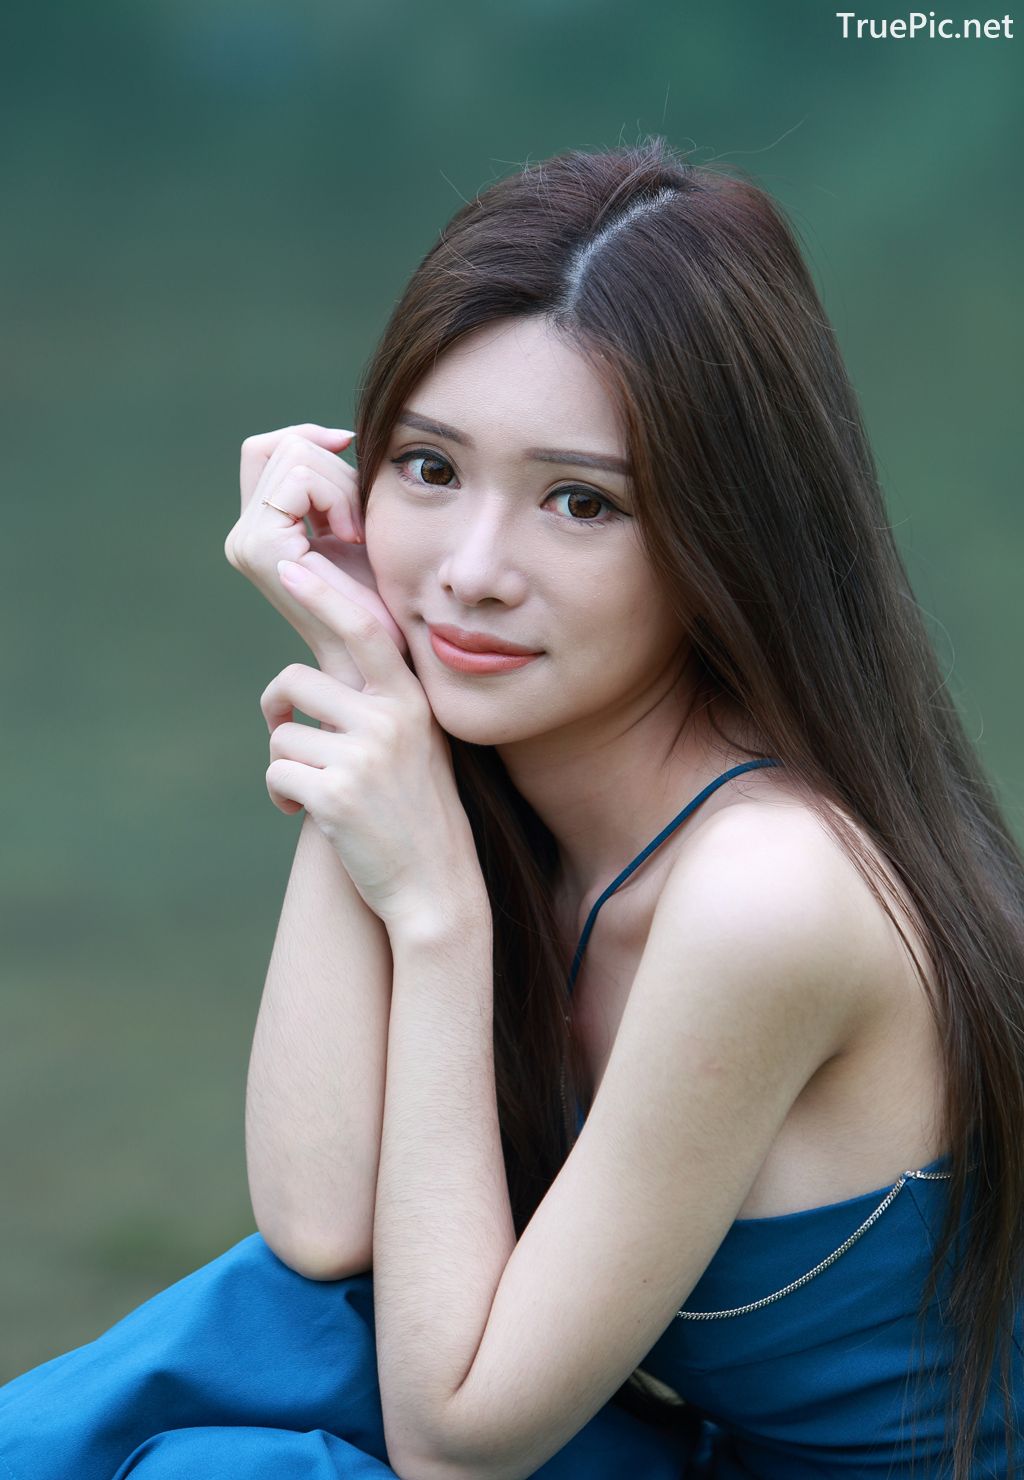 Image-Taiwanese-Pure-Girl-承容-Young-Beautiful-And-Lovely-TruePic.net- Picture-102